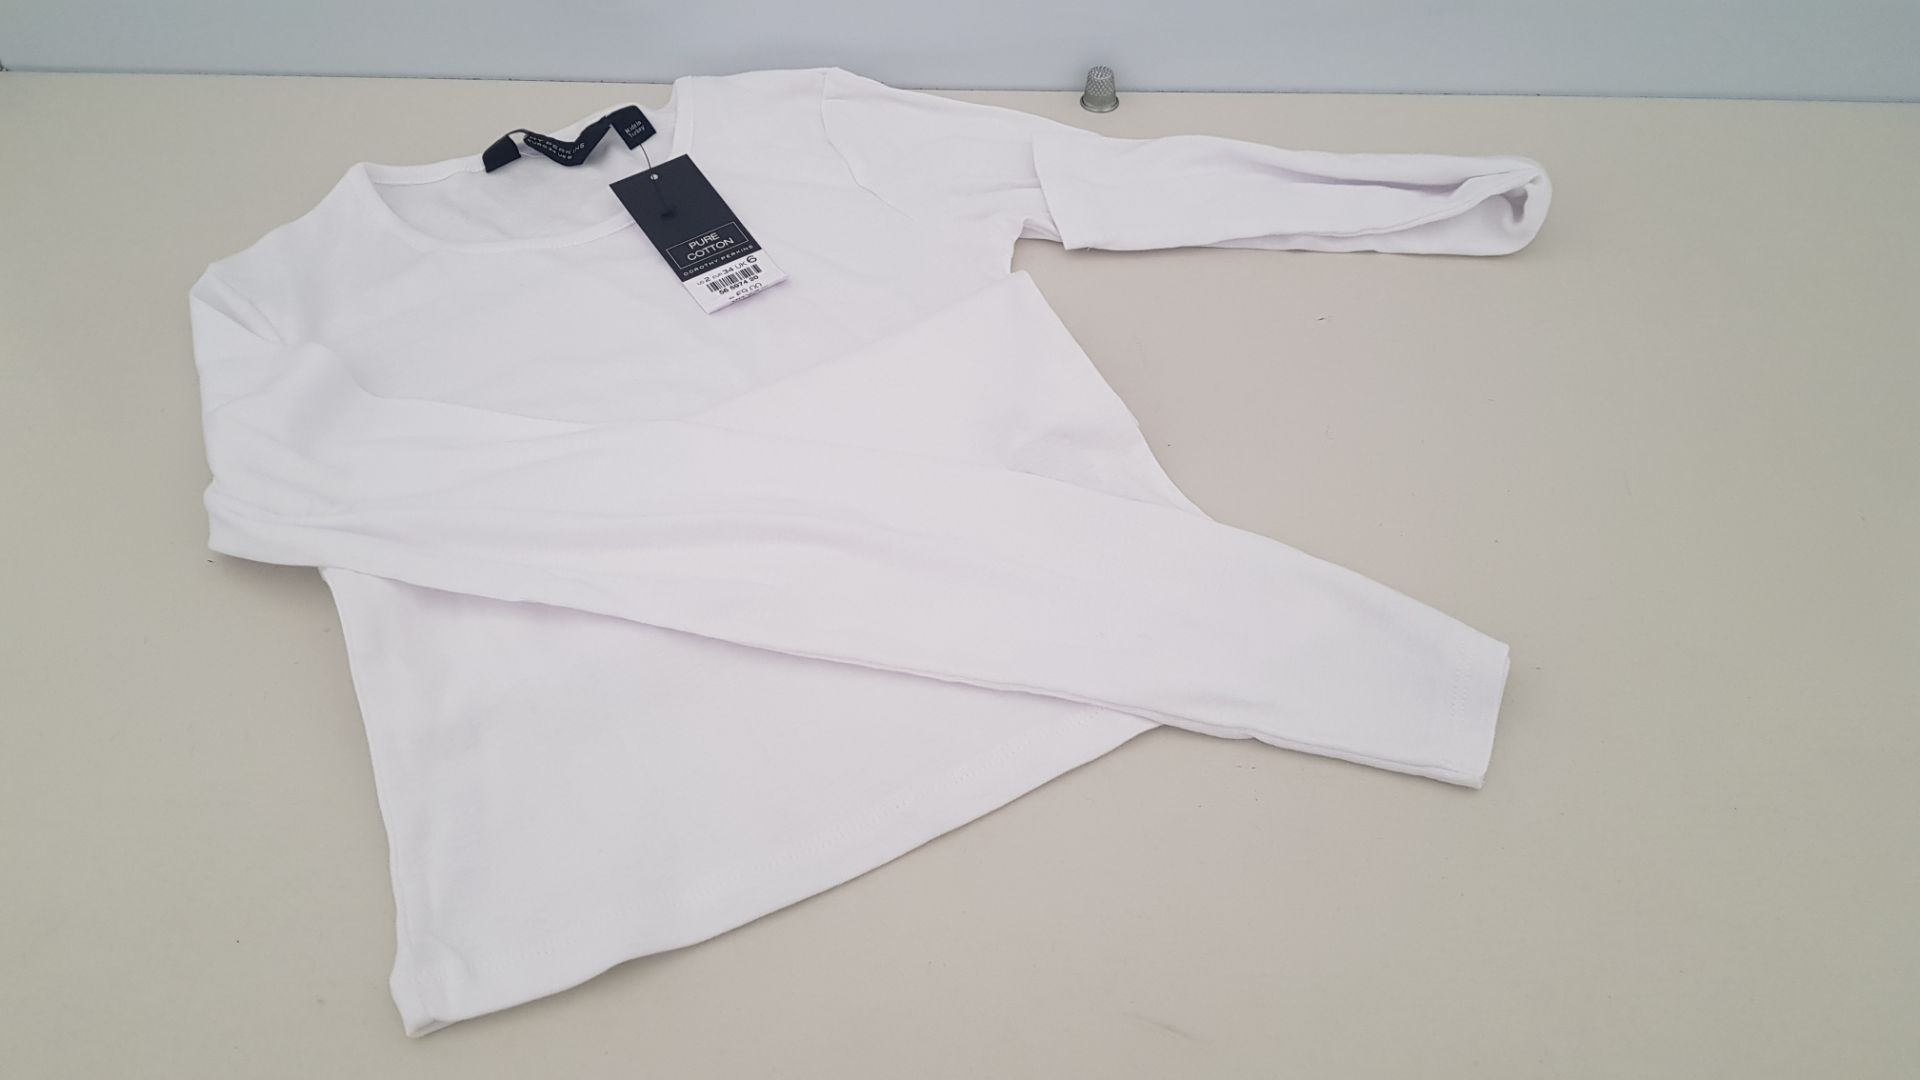 30 X BRAND NEW DOROTHY PERKINS PURE COTTON WHITE LONG SLEEVED TOPS UK SIZE 14 RRP £7.00 (TOTAL